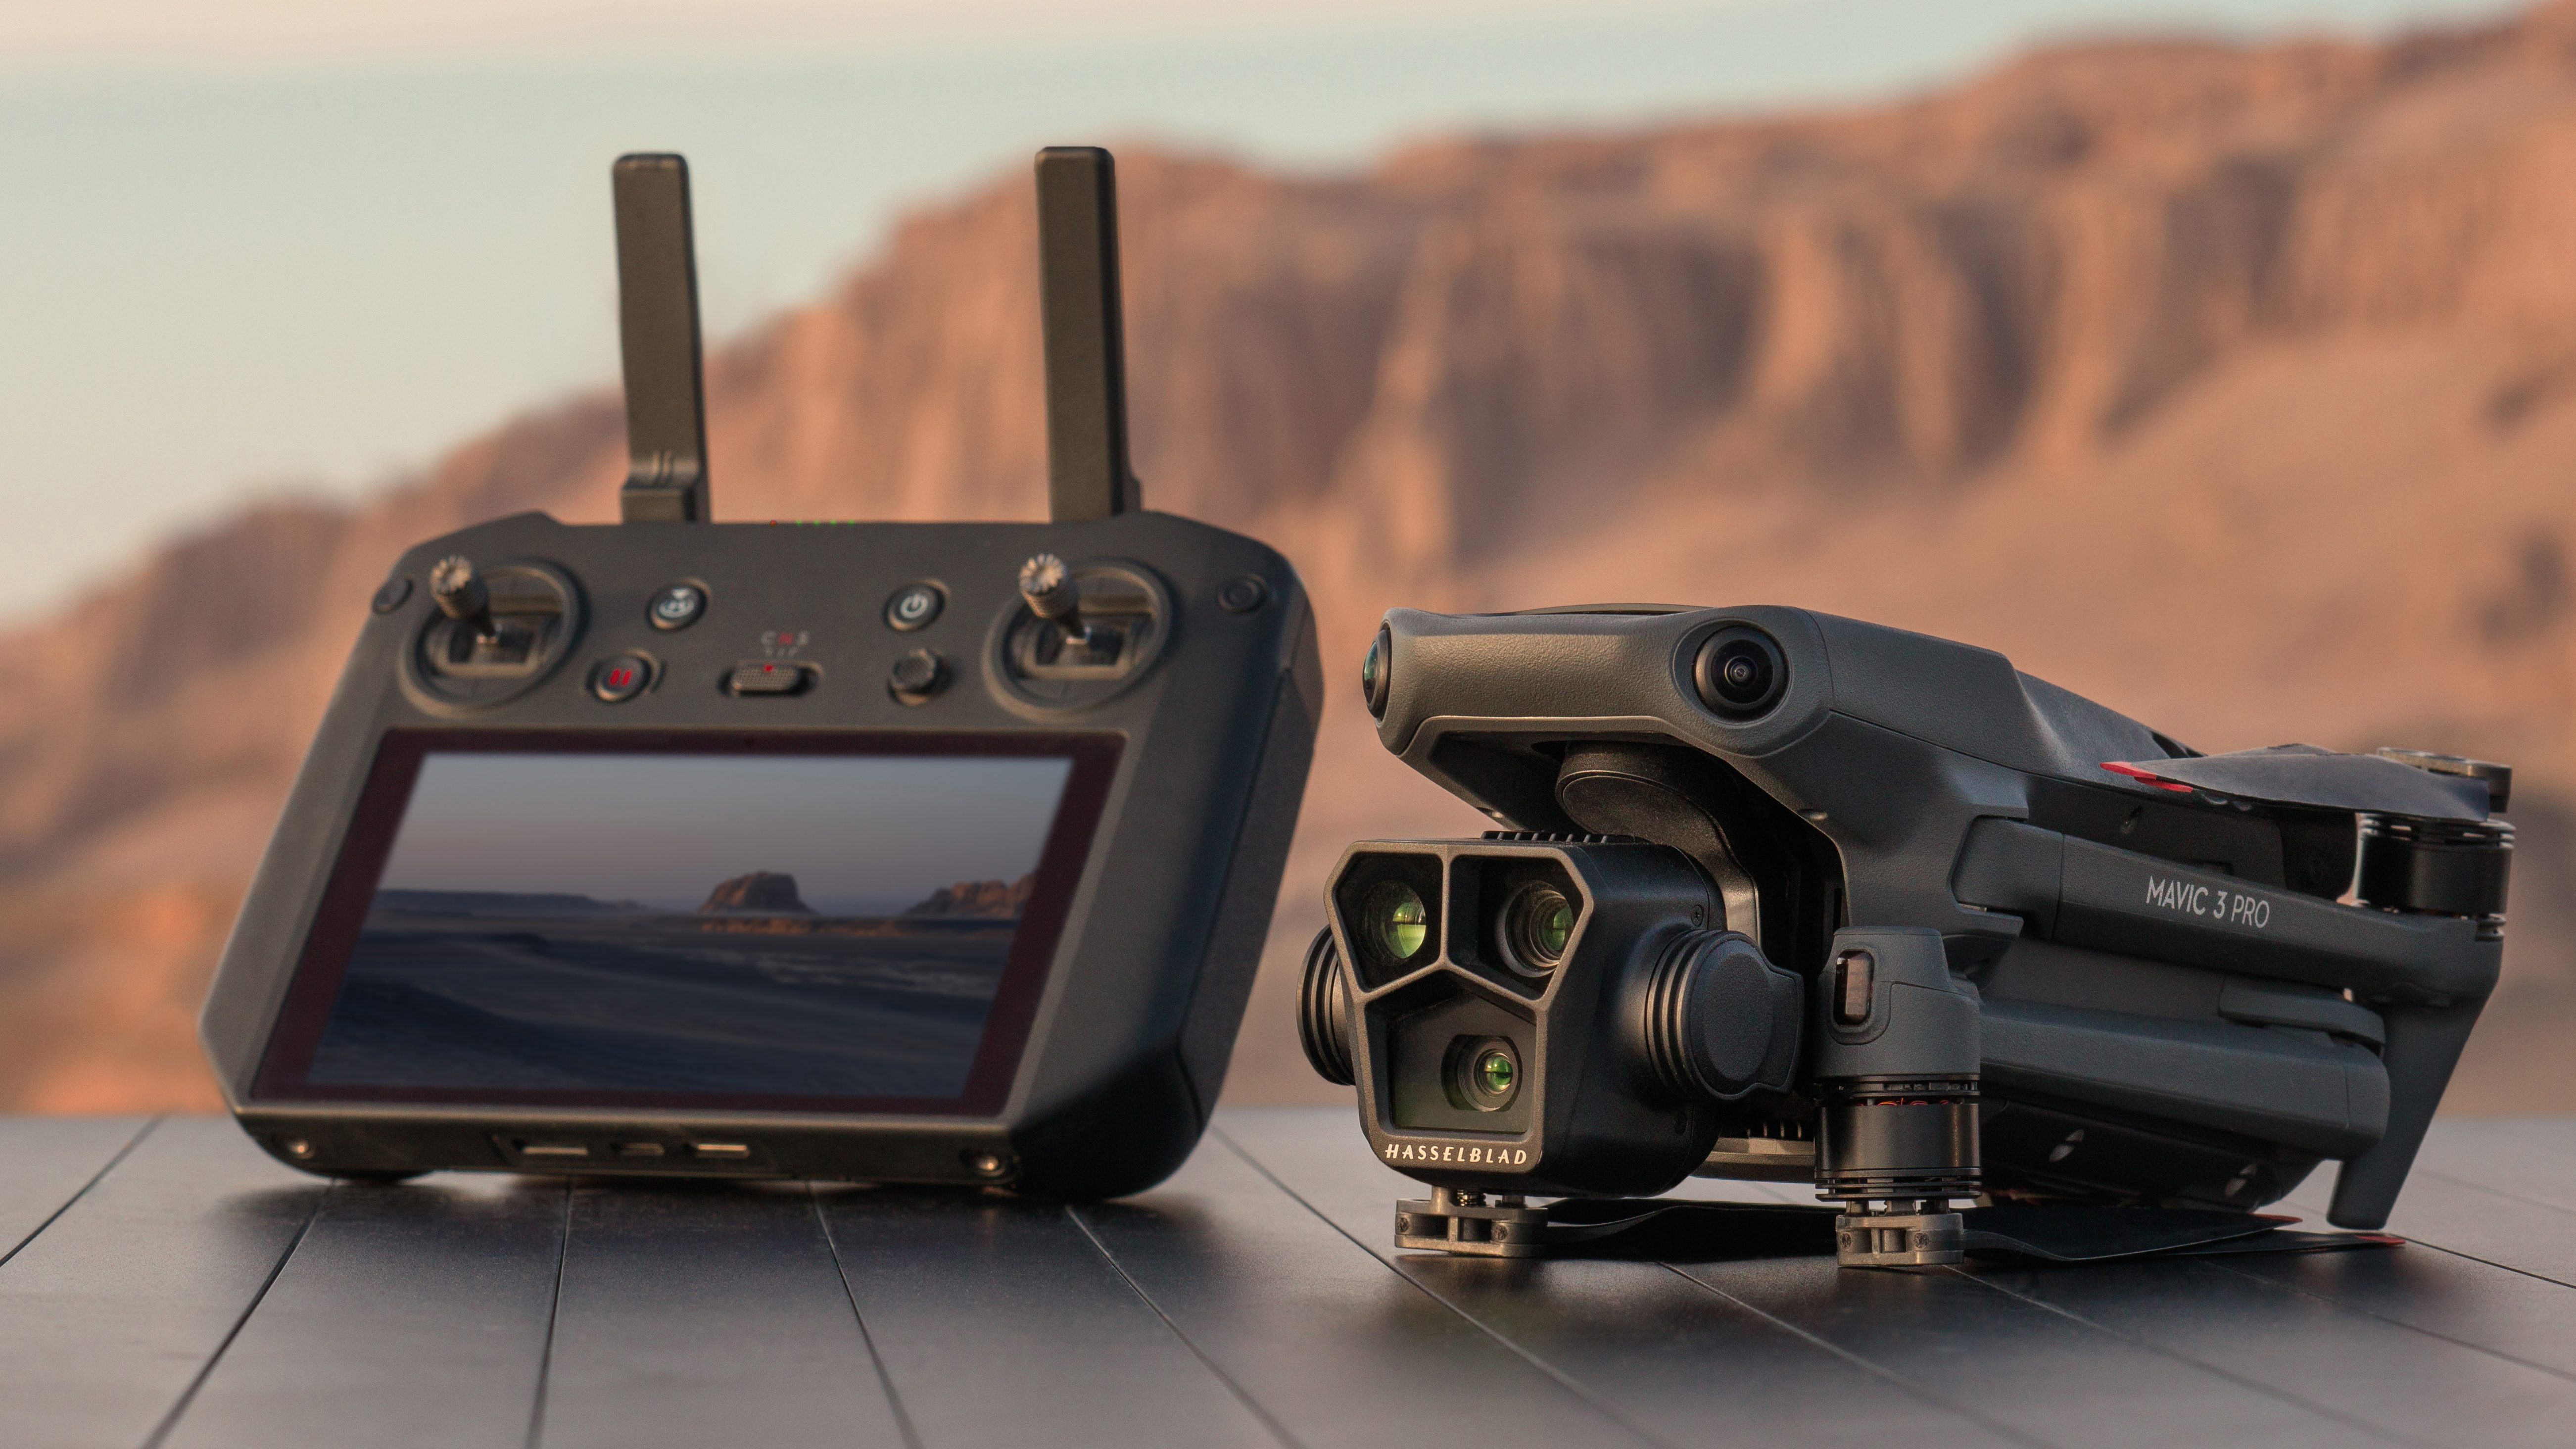 The DJI Mavic 3 Pro drone sitting on a rock next to its controller